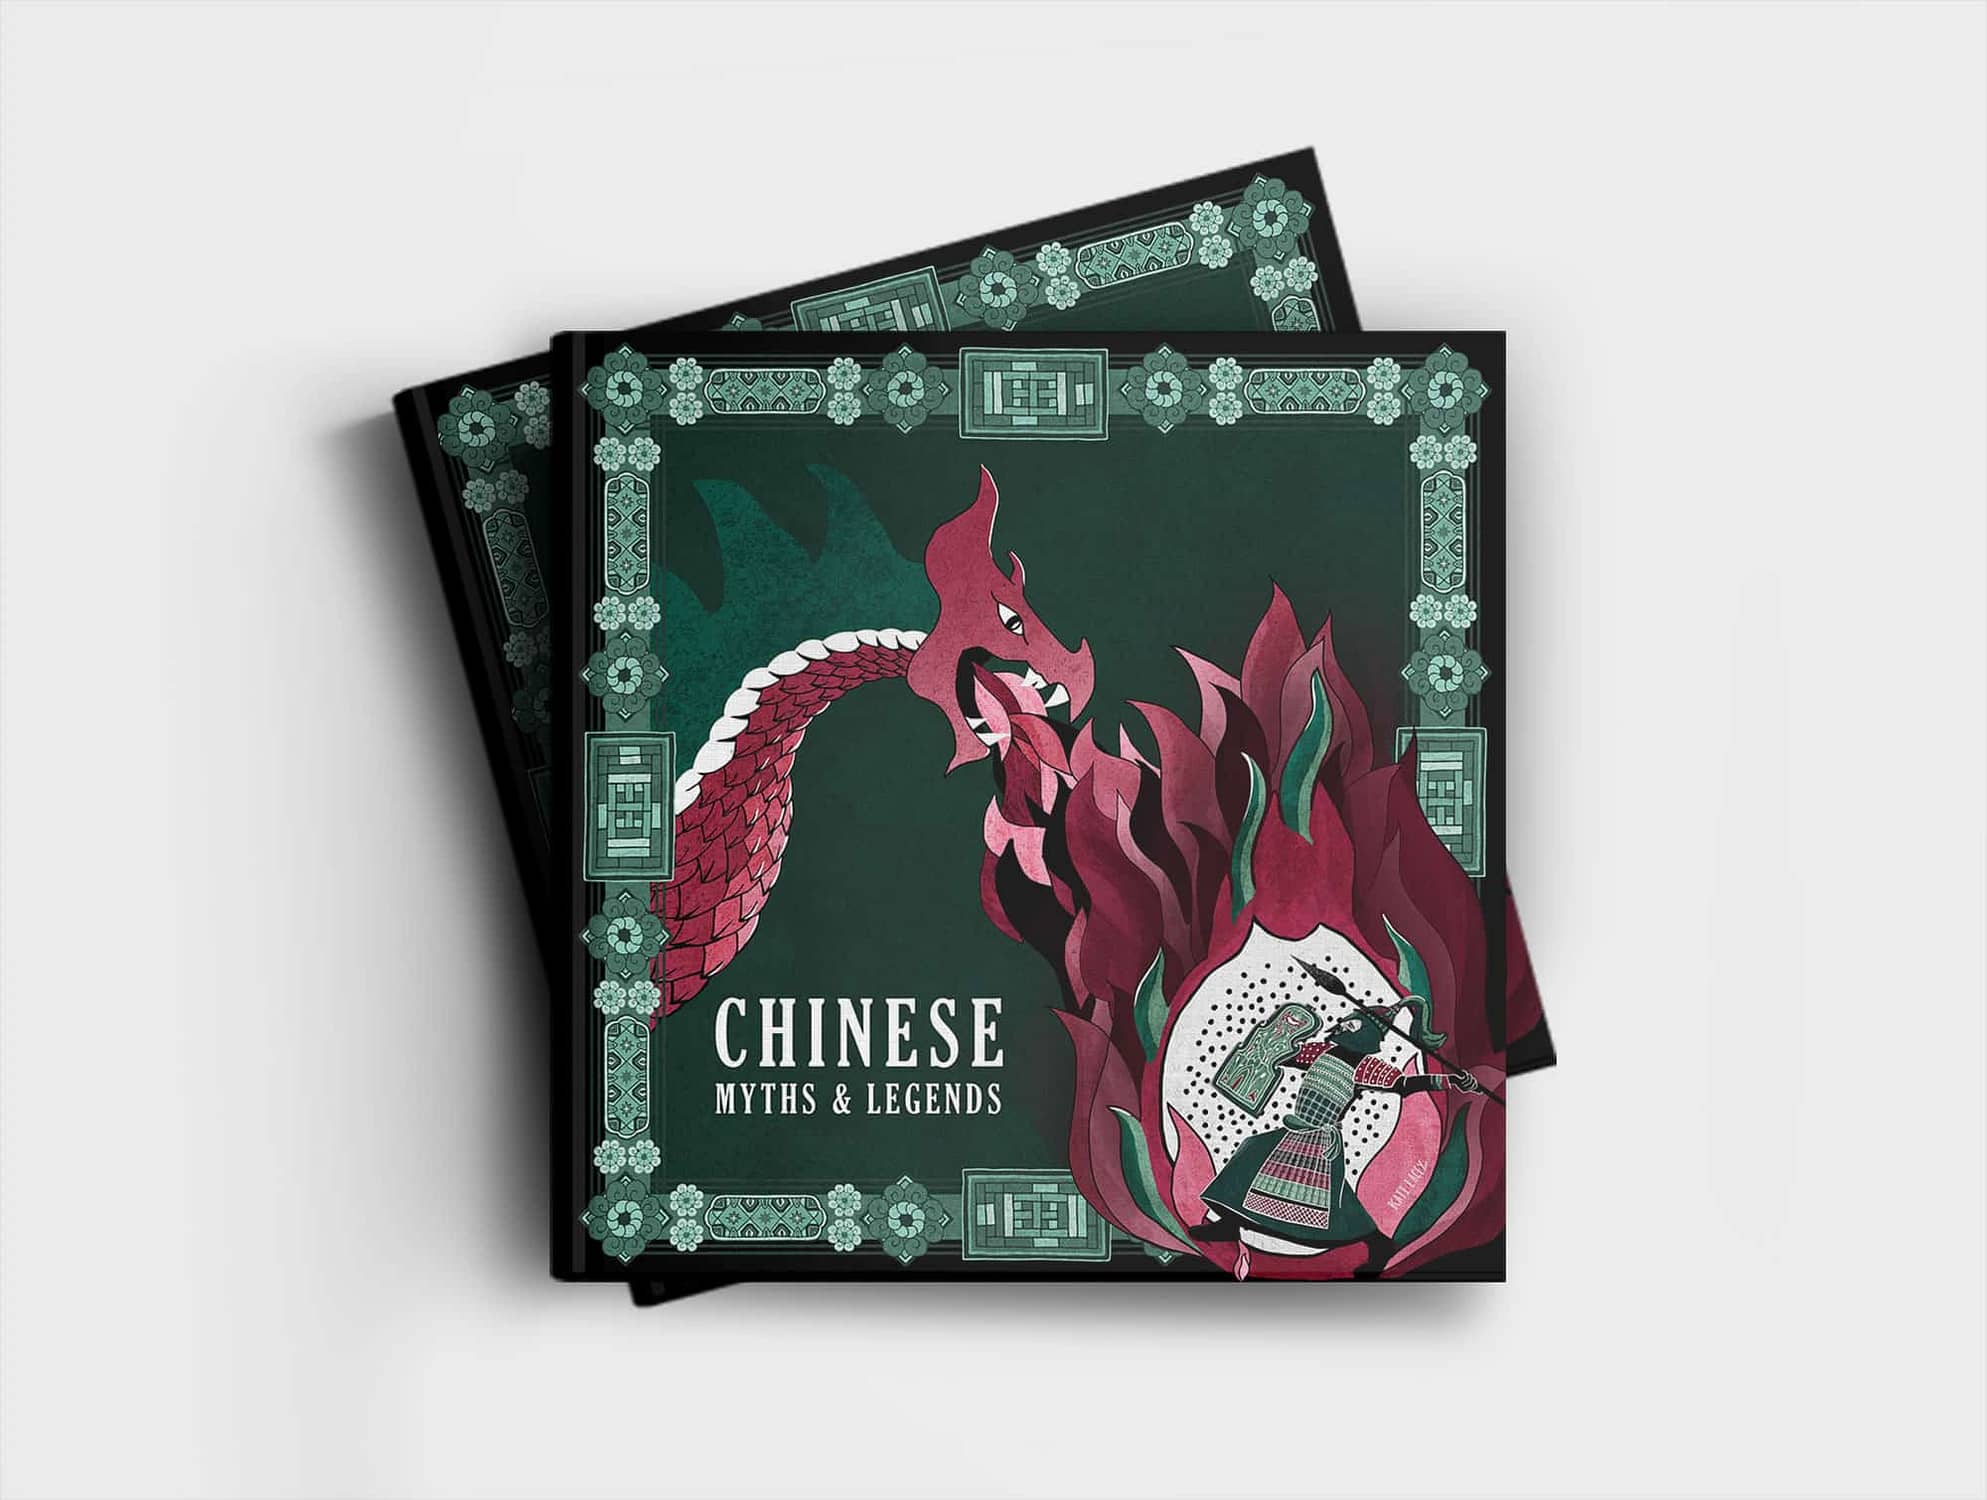 Chinese-myths-legends-illustrated book-cover-design